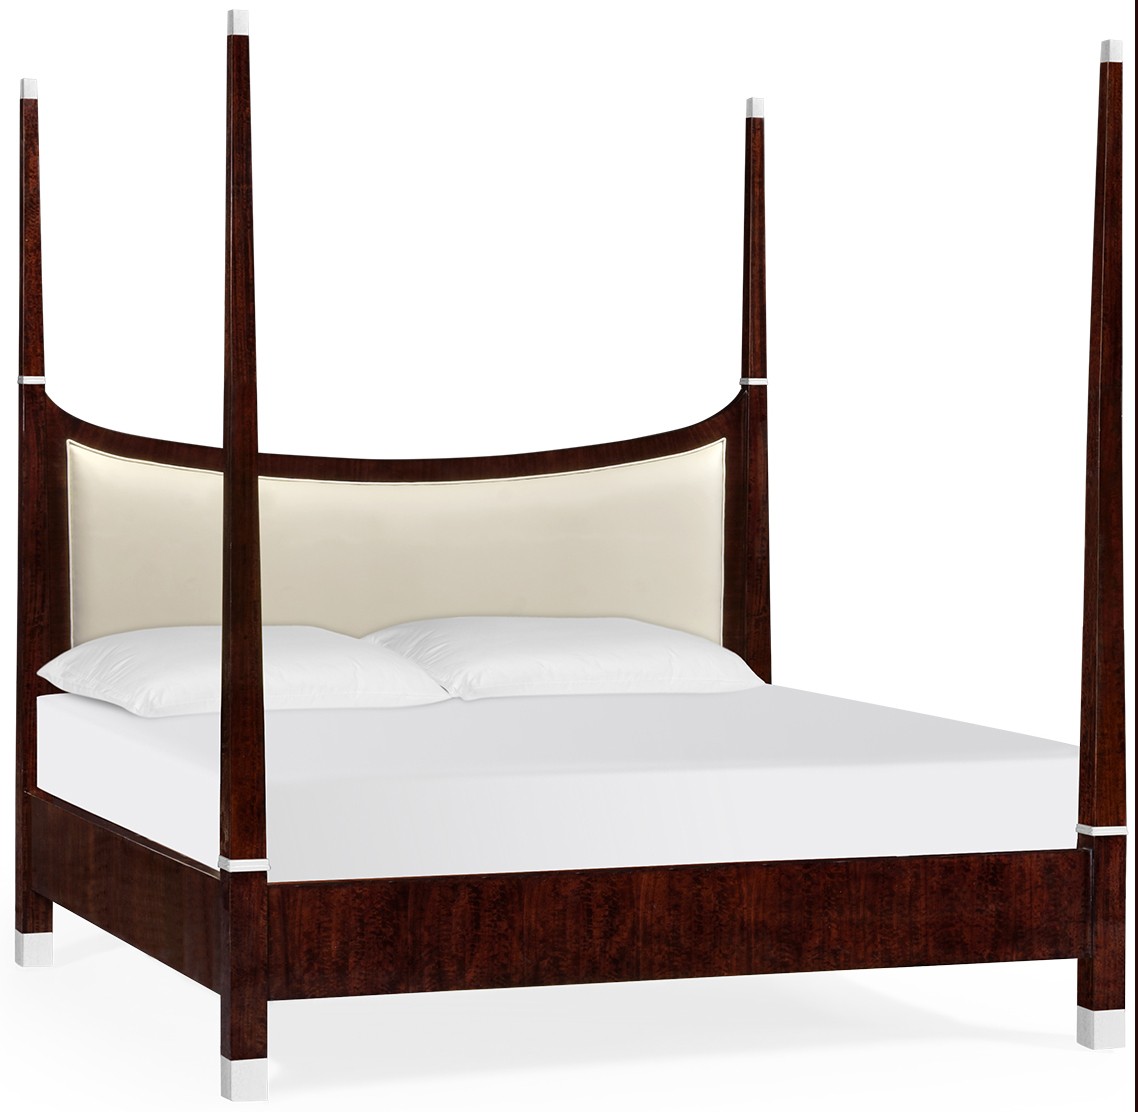 Queen and King Sized Beds Bed leather headboard